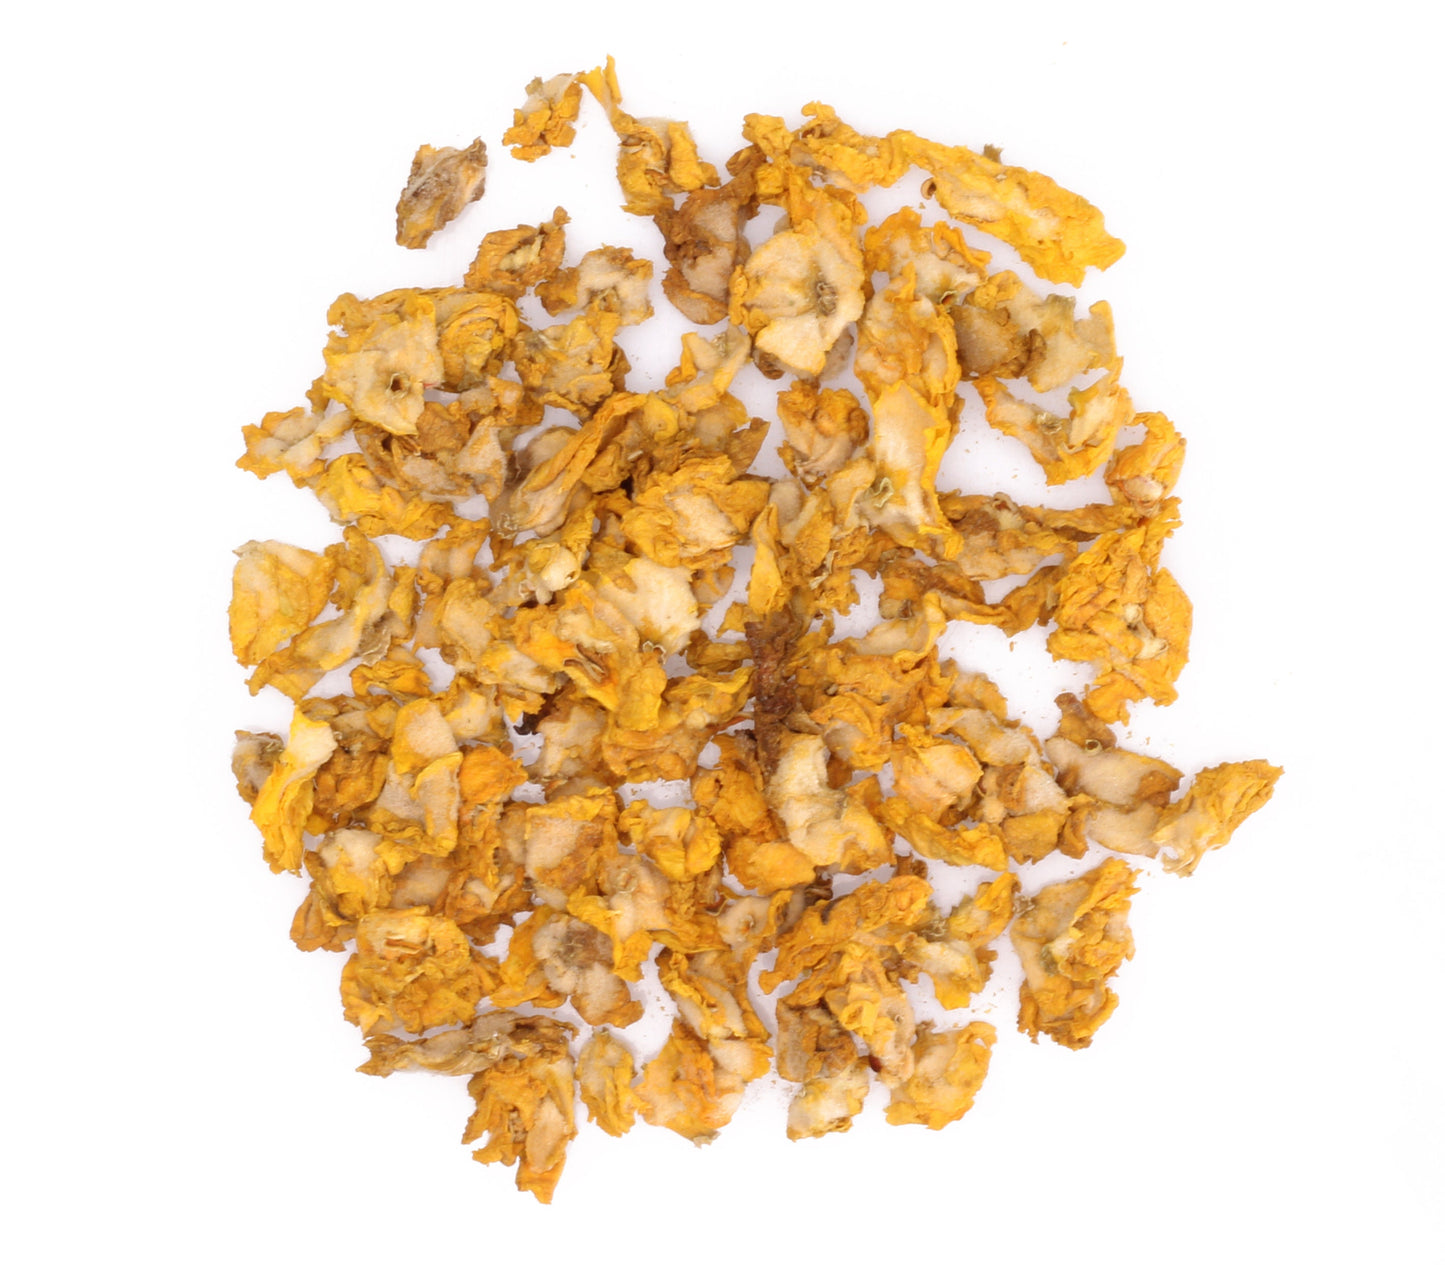 Dried Mullein Flowers / Available from 1oz to 32oz/ Mullein Flower / Herbal Tea / Verbascum Thapsus - Vesta Market